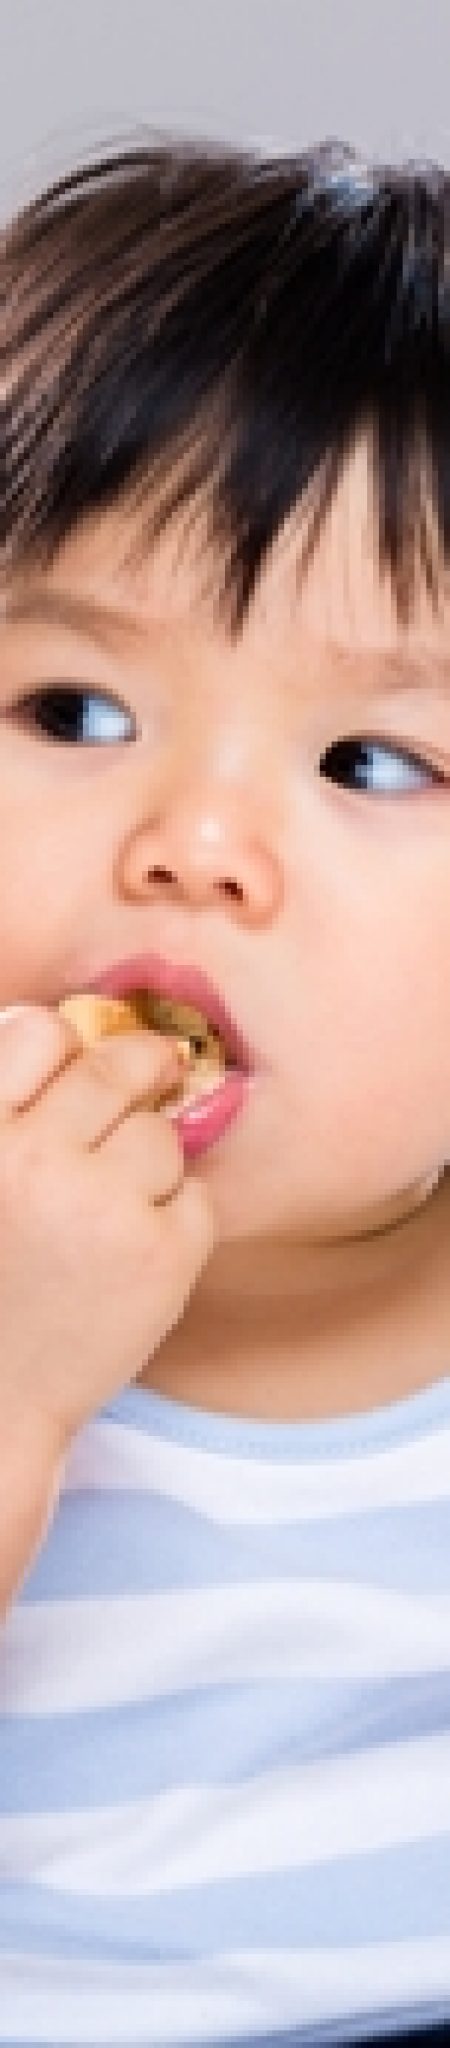 Oh, Baby!! Teething is Tough for Toddlers and Tots - How to Ease the Pain